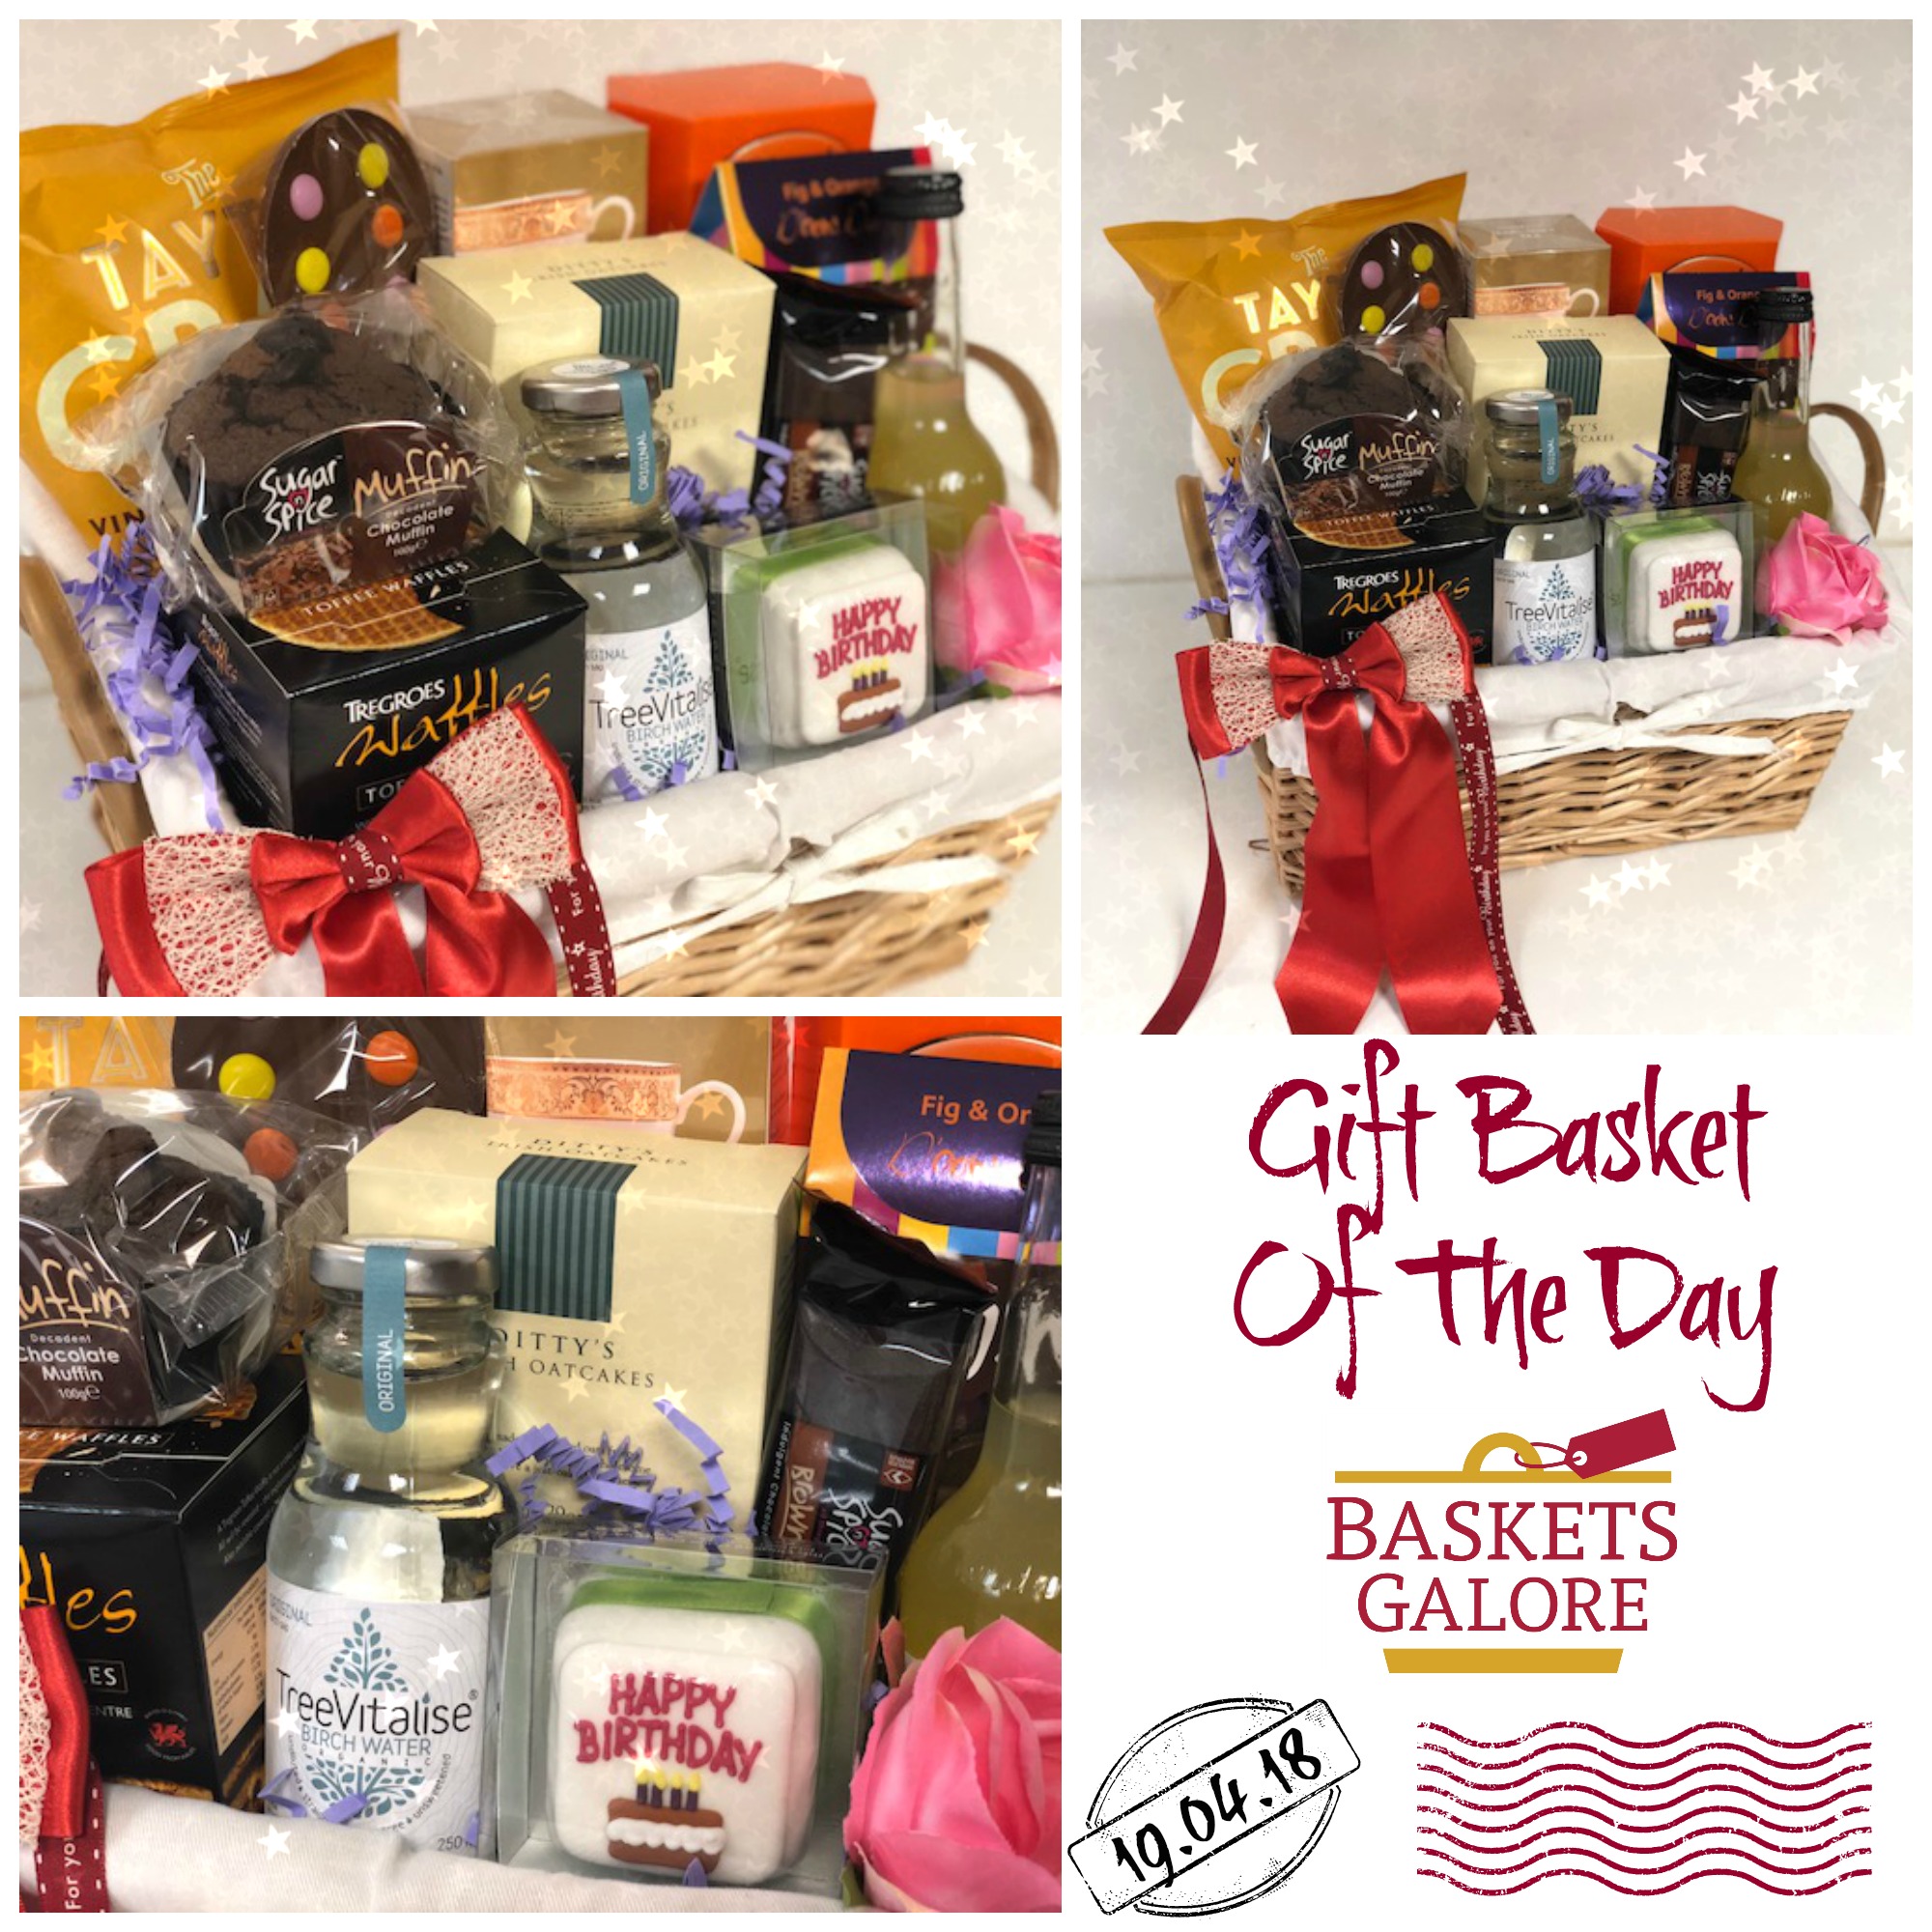 Baskets Galore’s Customer Gifts – Gift Basket of the Day 19.04.18